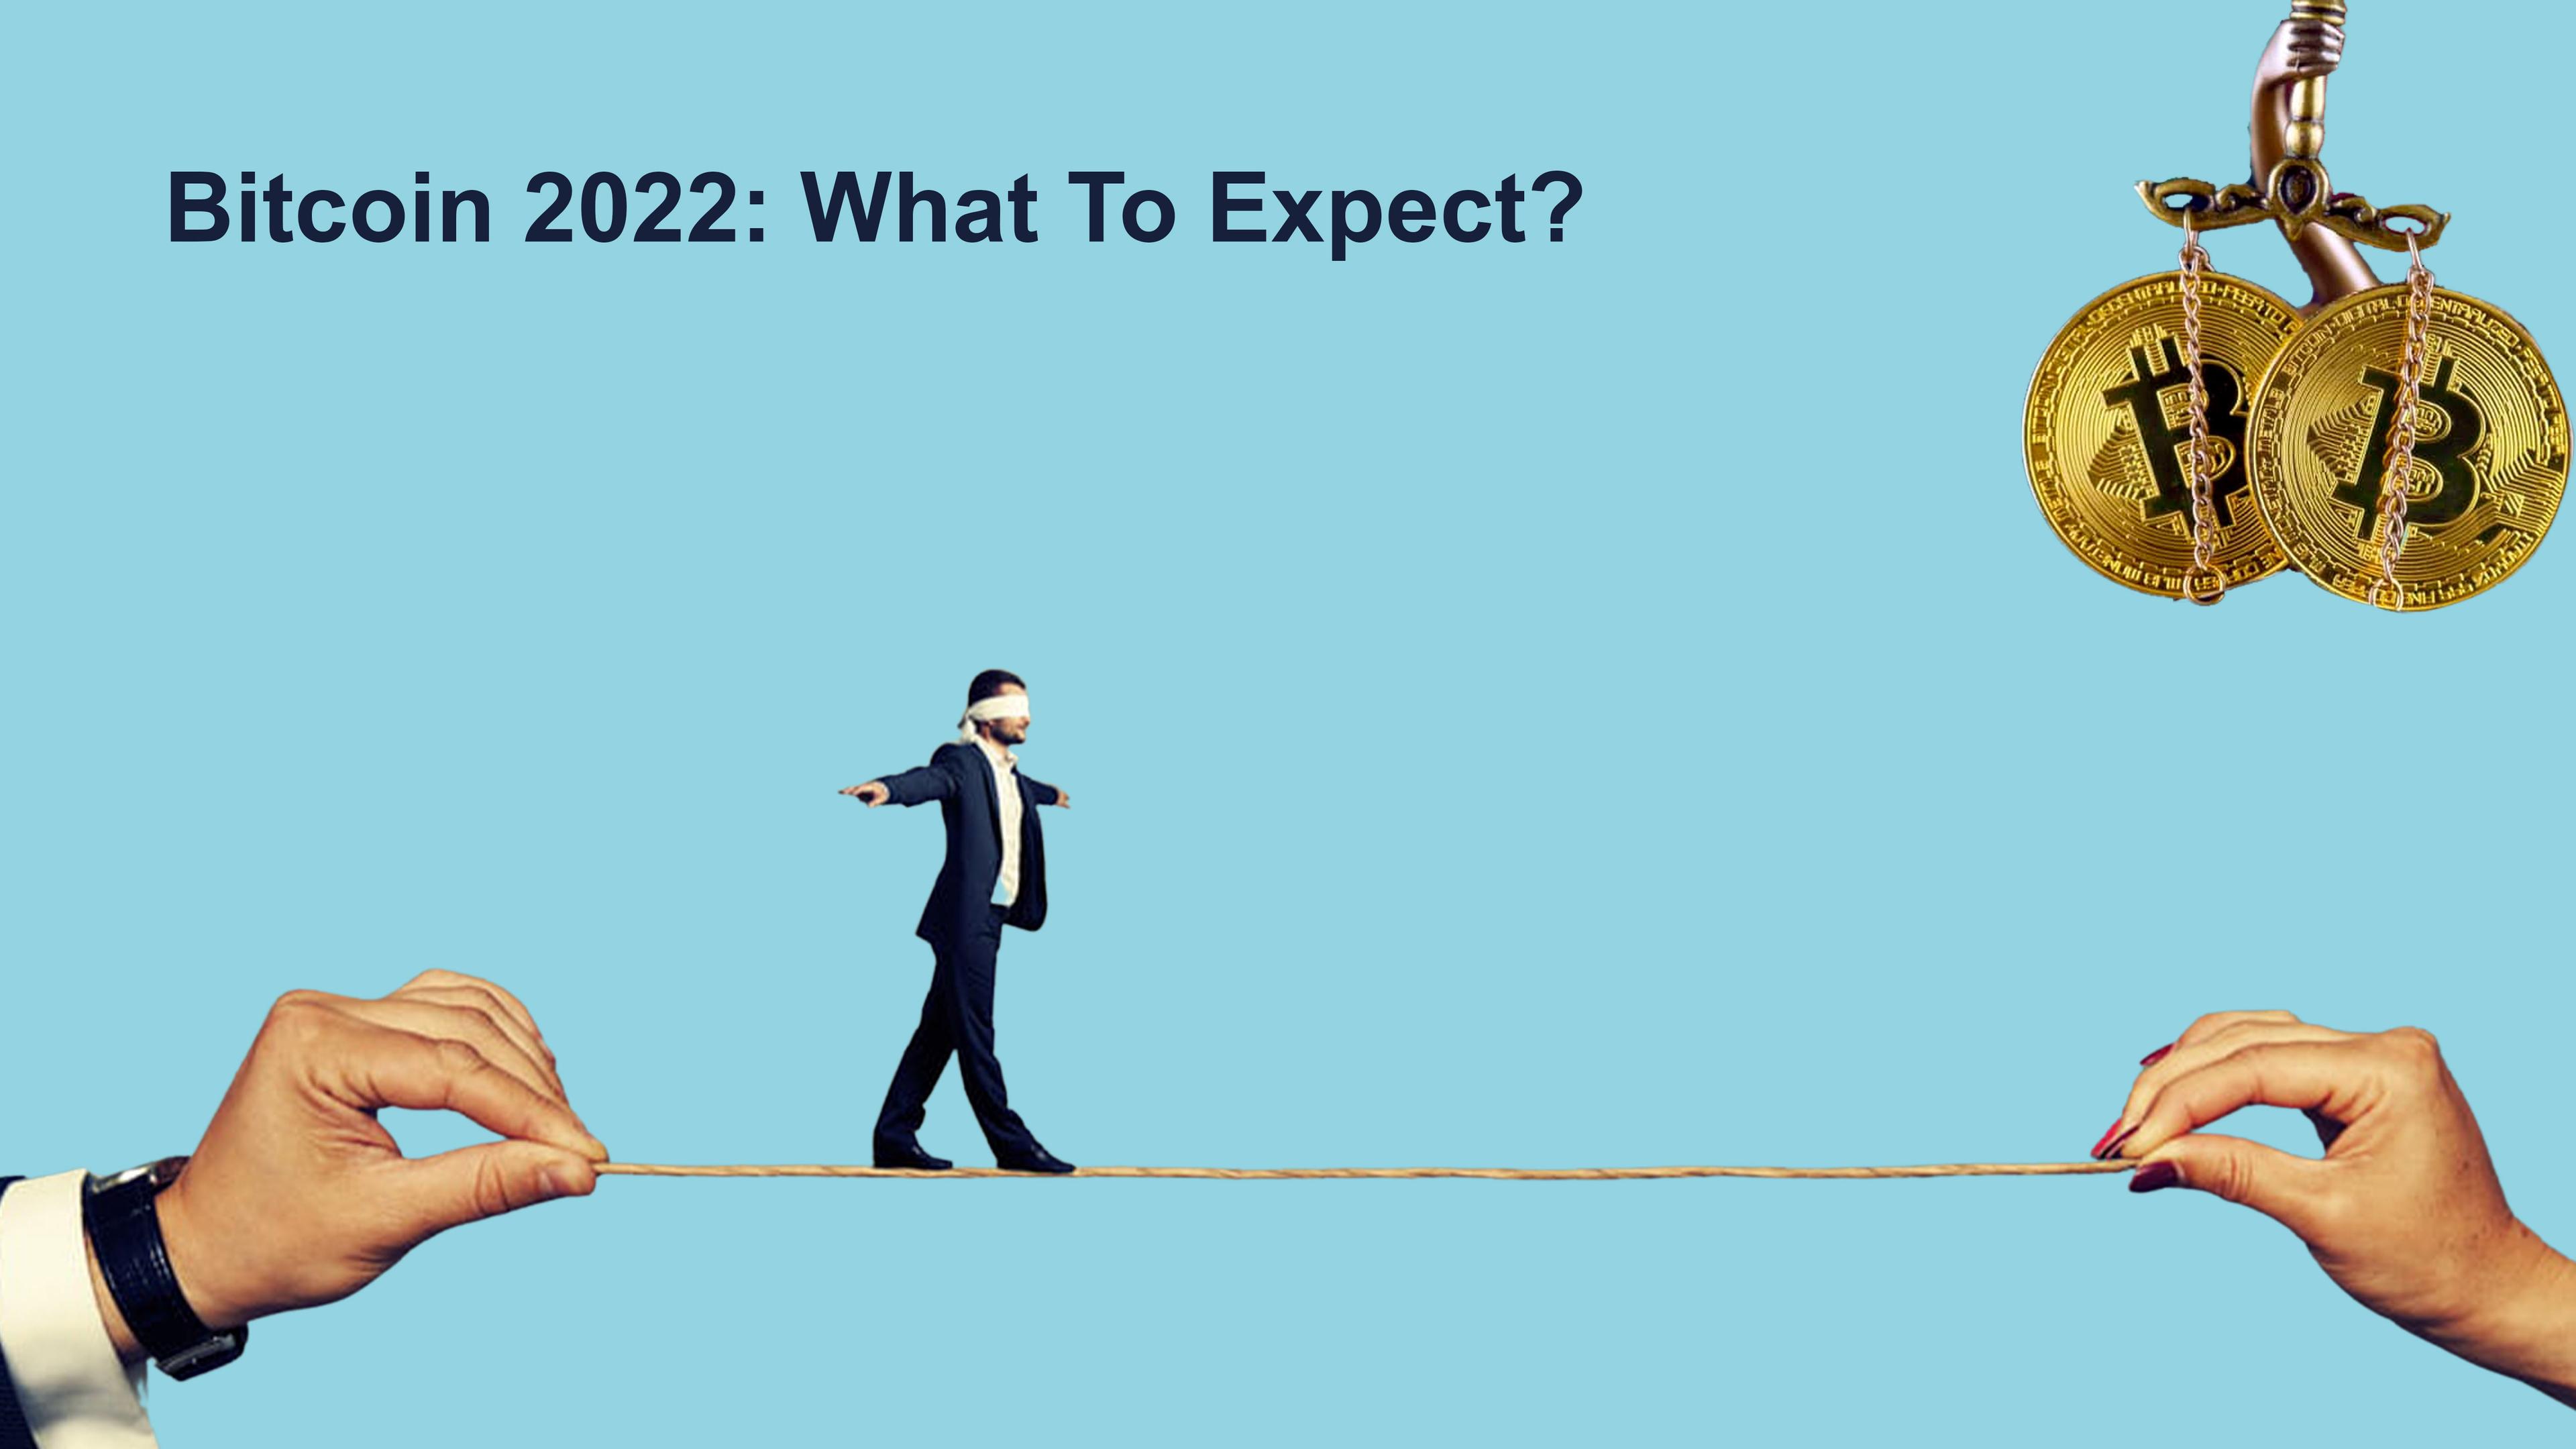 Bitcoin in 2022: Why to Expect the Bulls?